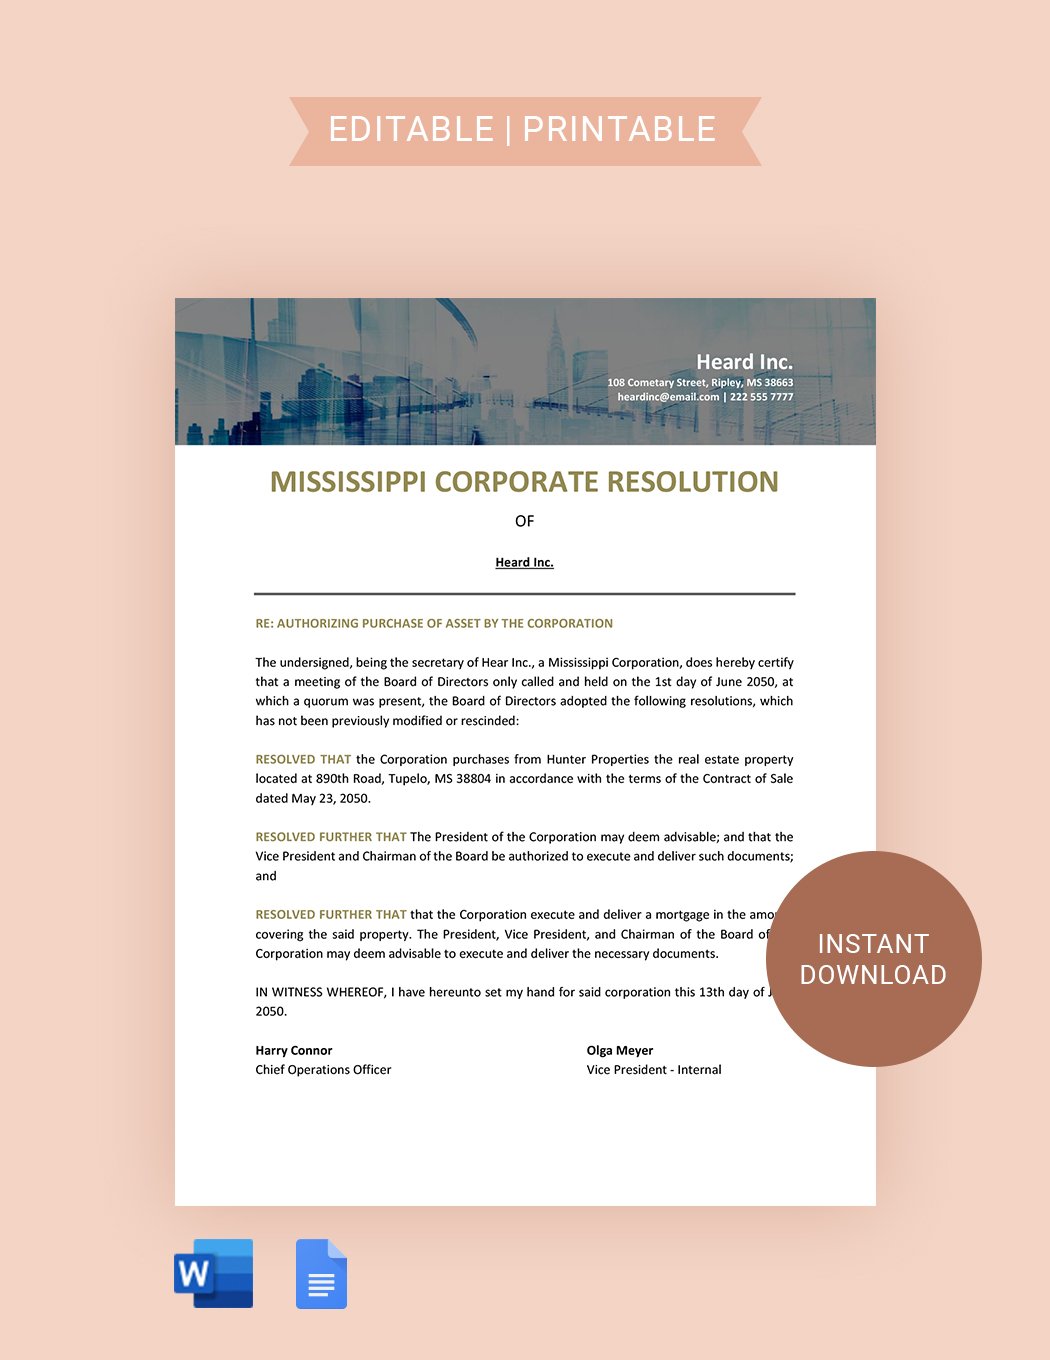 Mississippi Corporate Resolution Template in Word, Google Docs